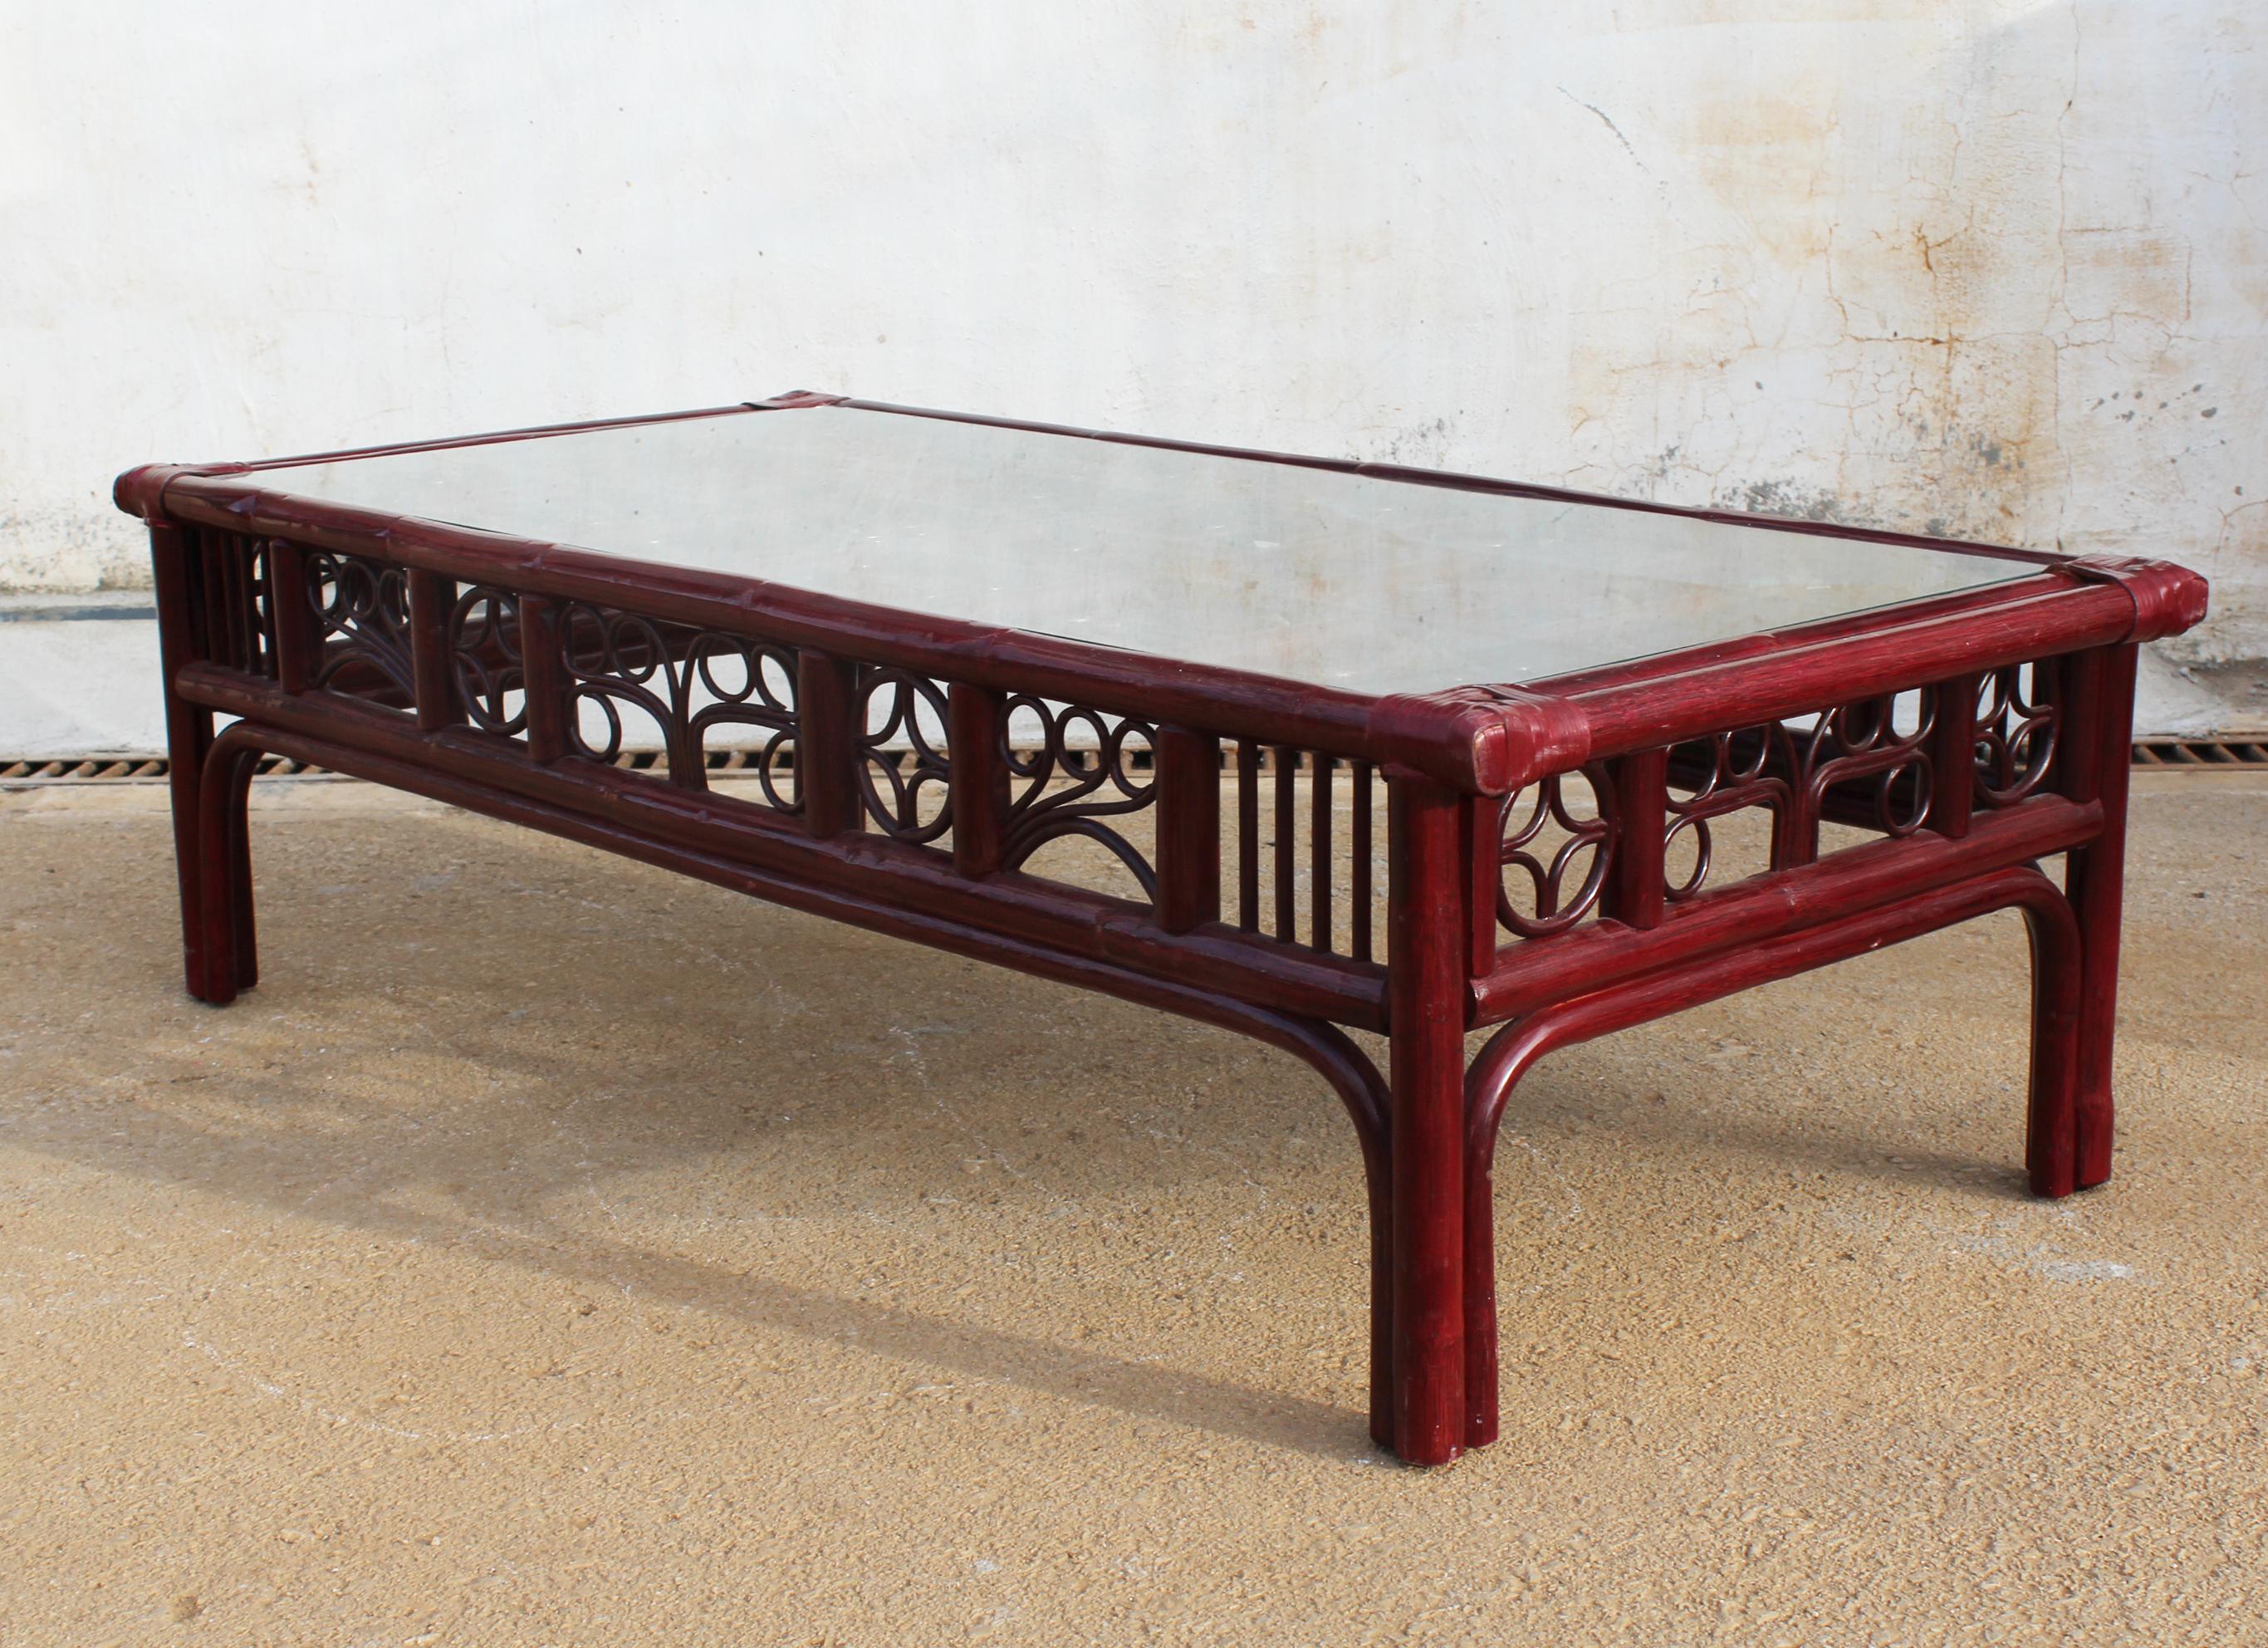 Bamboo 1970s Spanish Oriental Style Red Wooden Coffee Table with Leather Binds For Sale